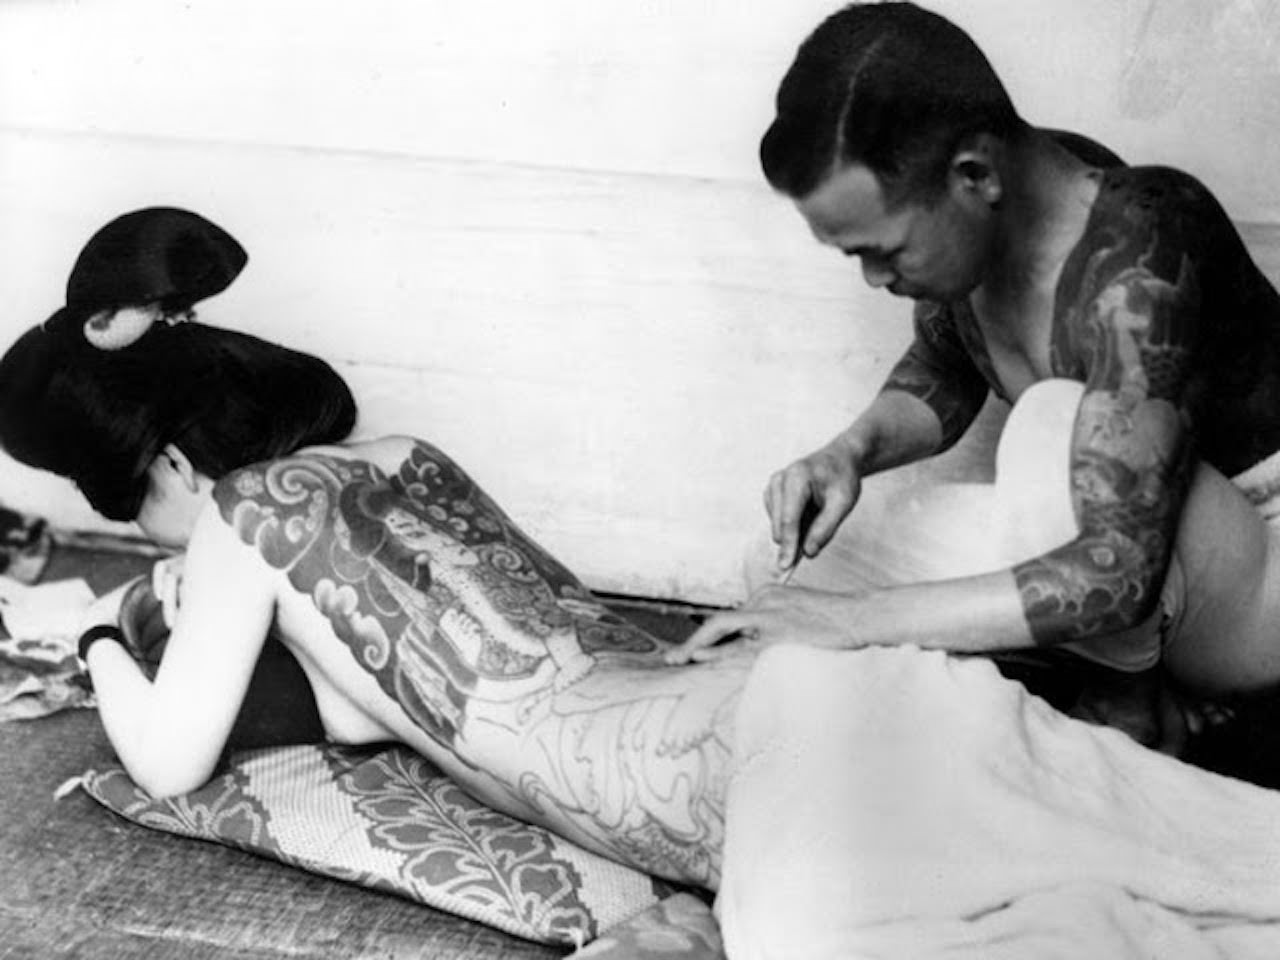 Woman being tattooed, ca. 1940s.